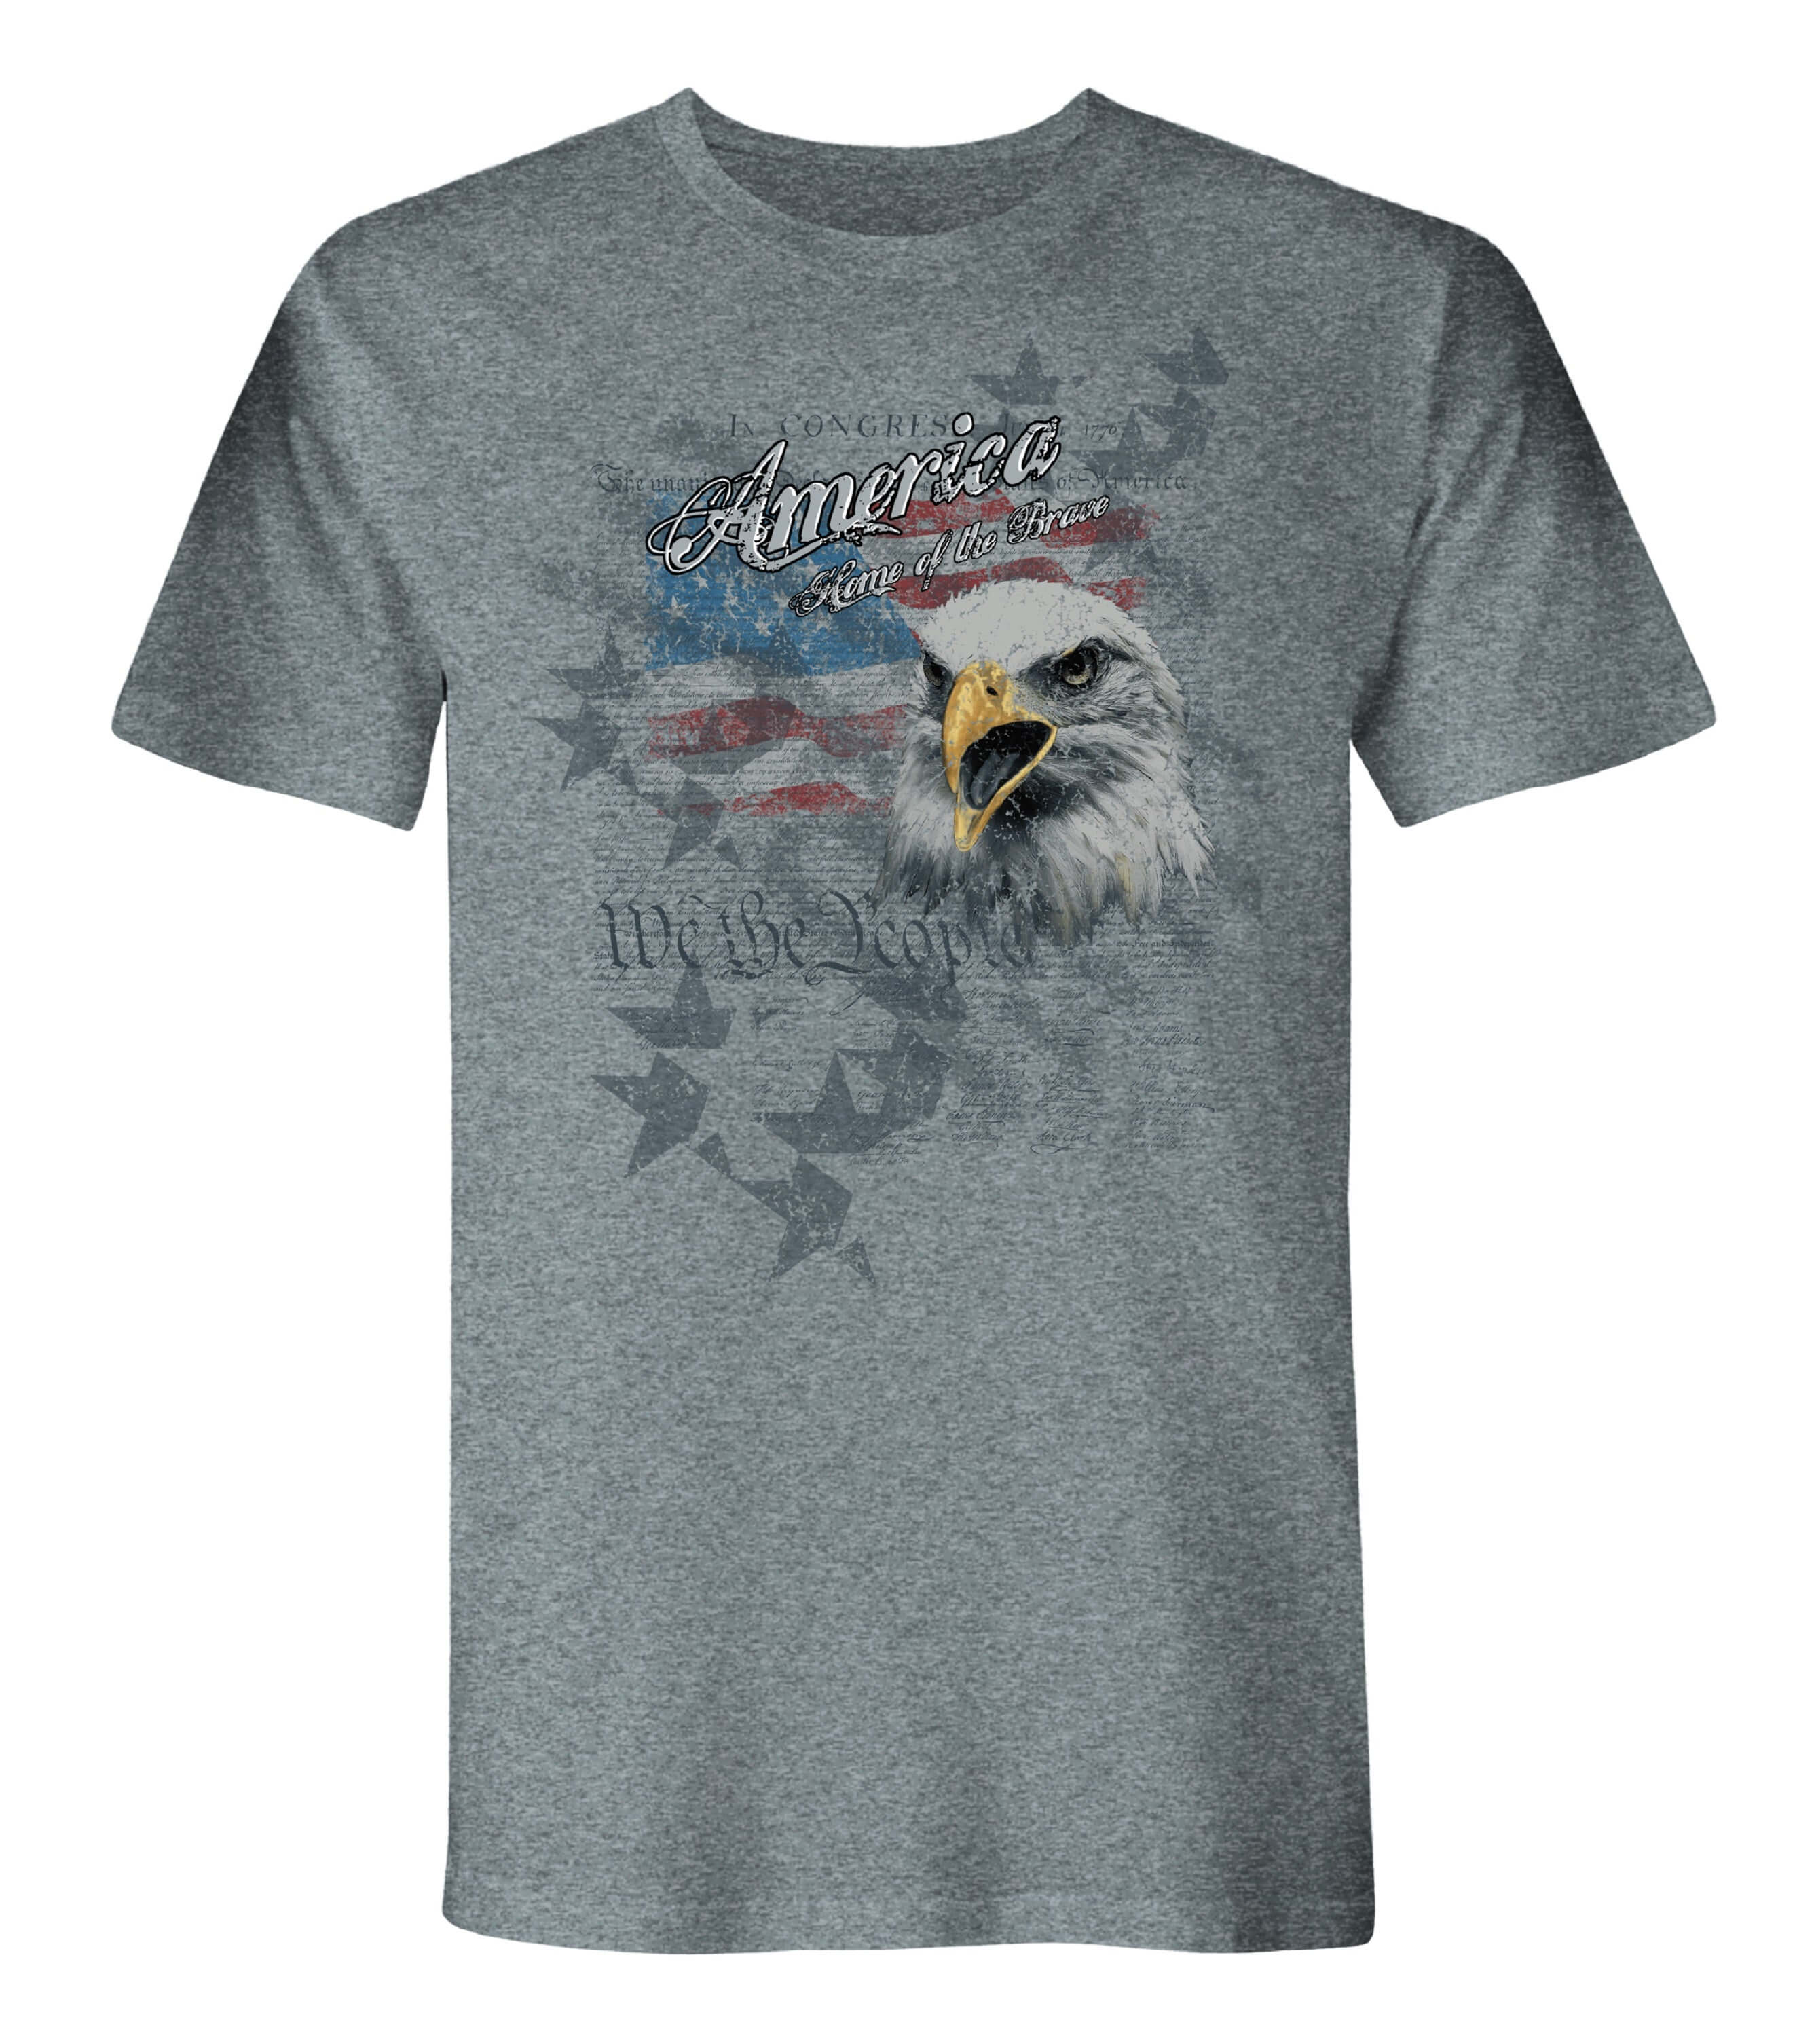 Home Of The Brave Made In America Short Sleeve Tee – The Flag Shirt